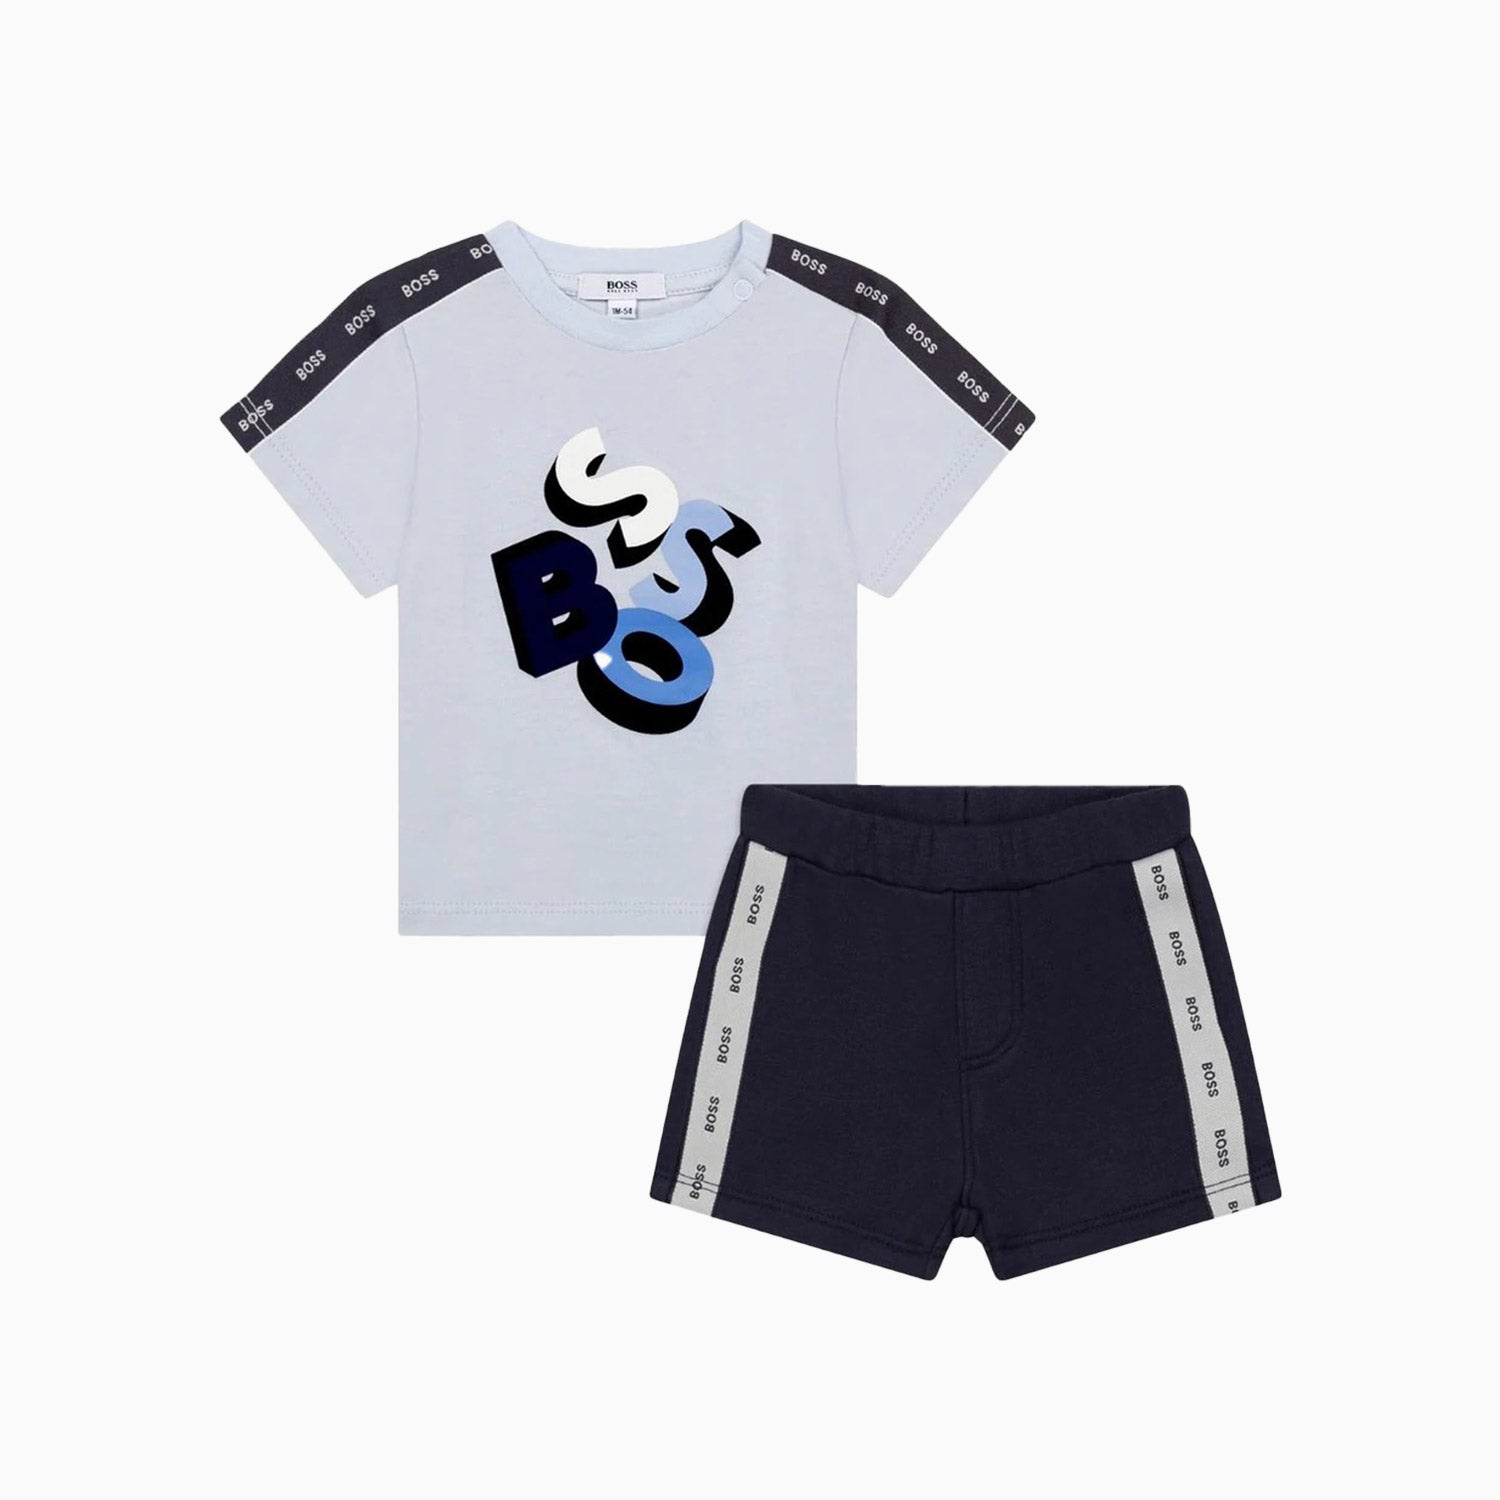 hugo-boss-kids-t-shirt-and-shorts-outfit-toddlers-j98353-10b